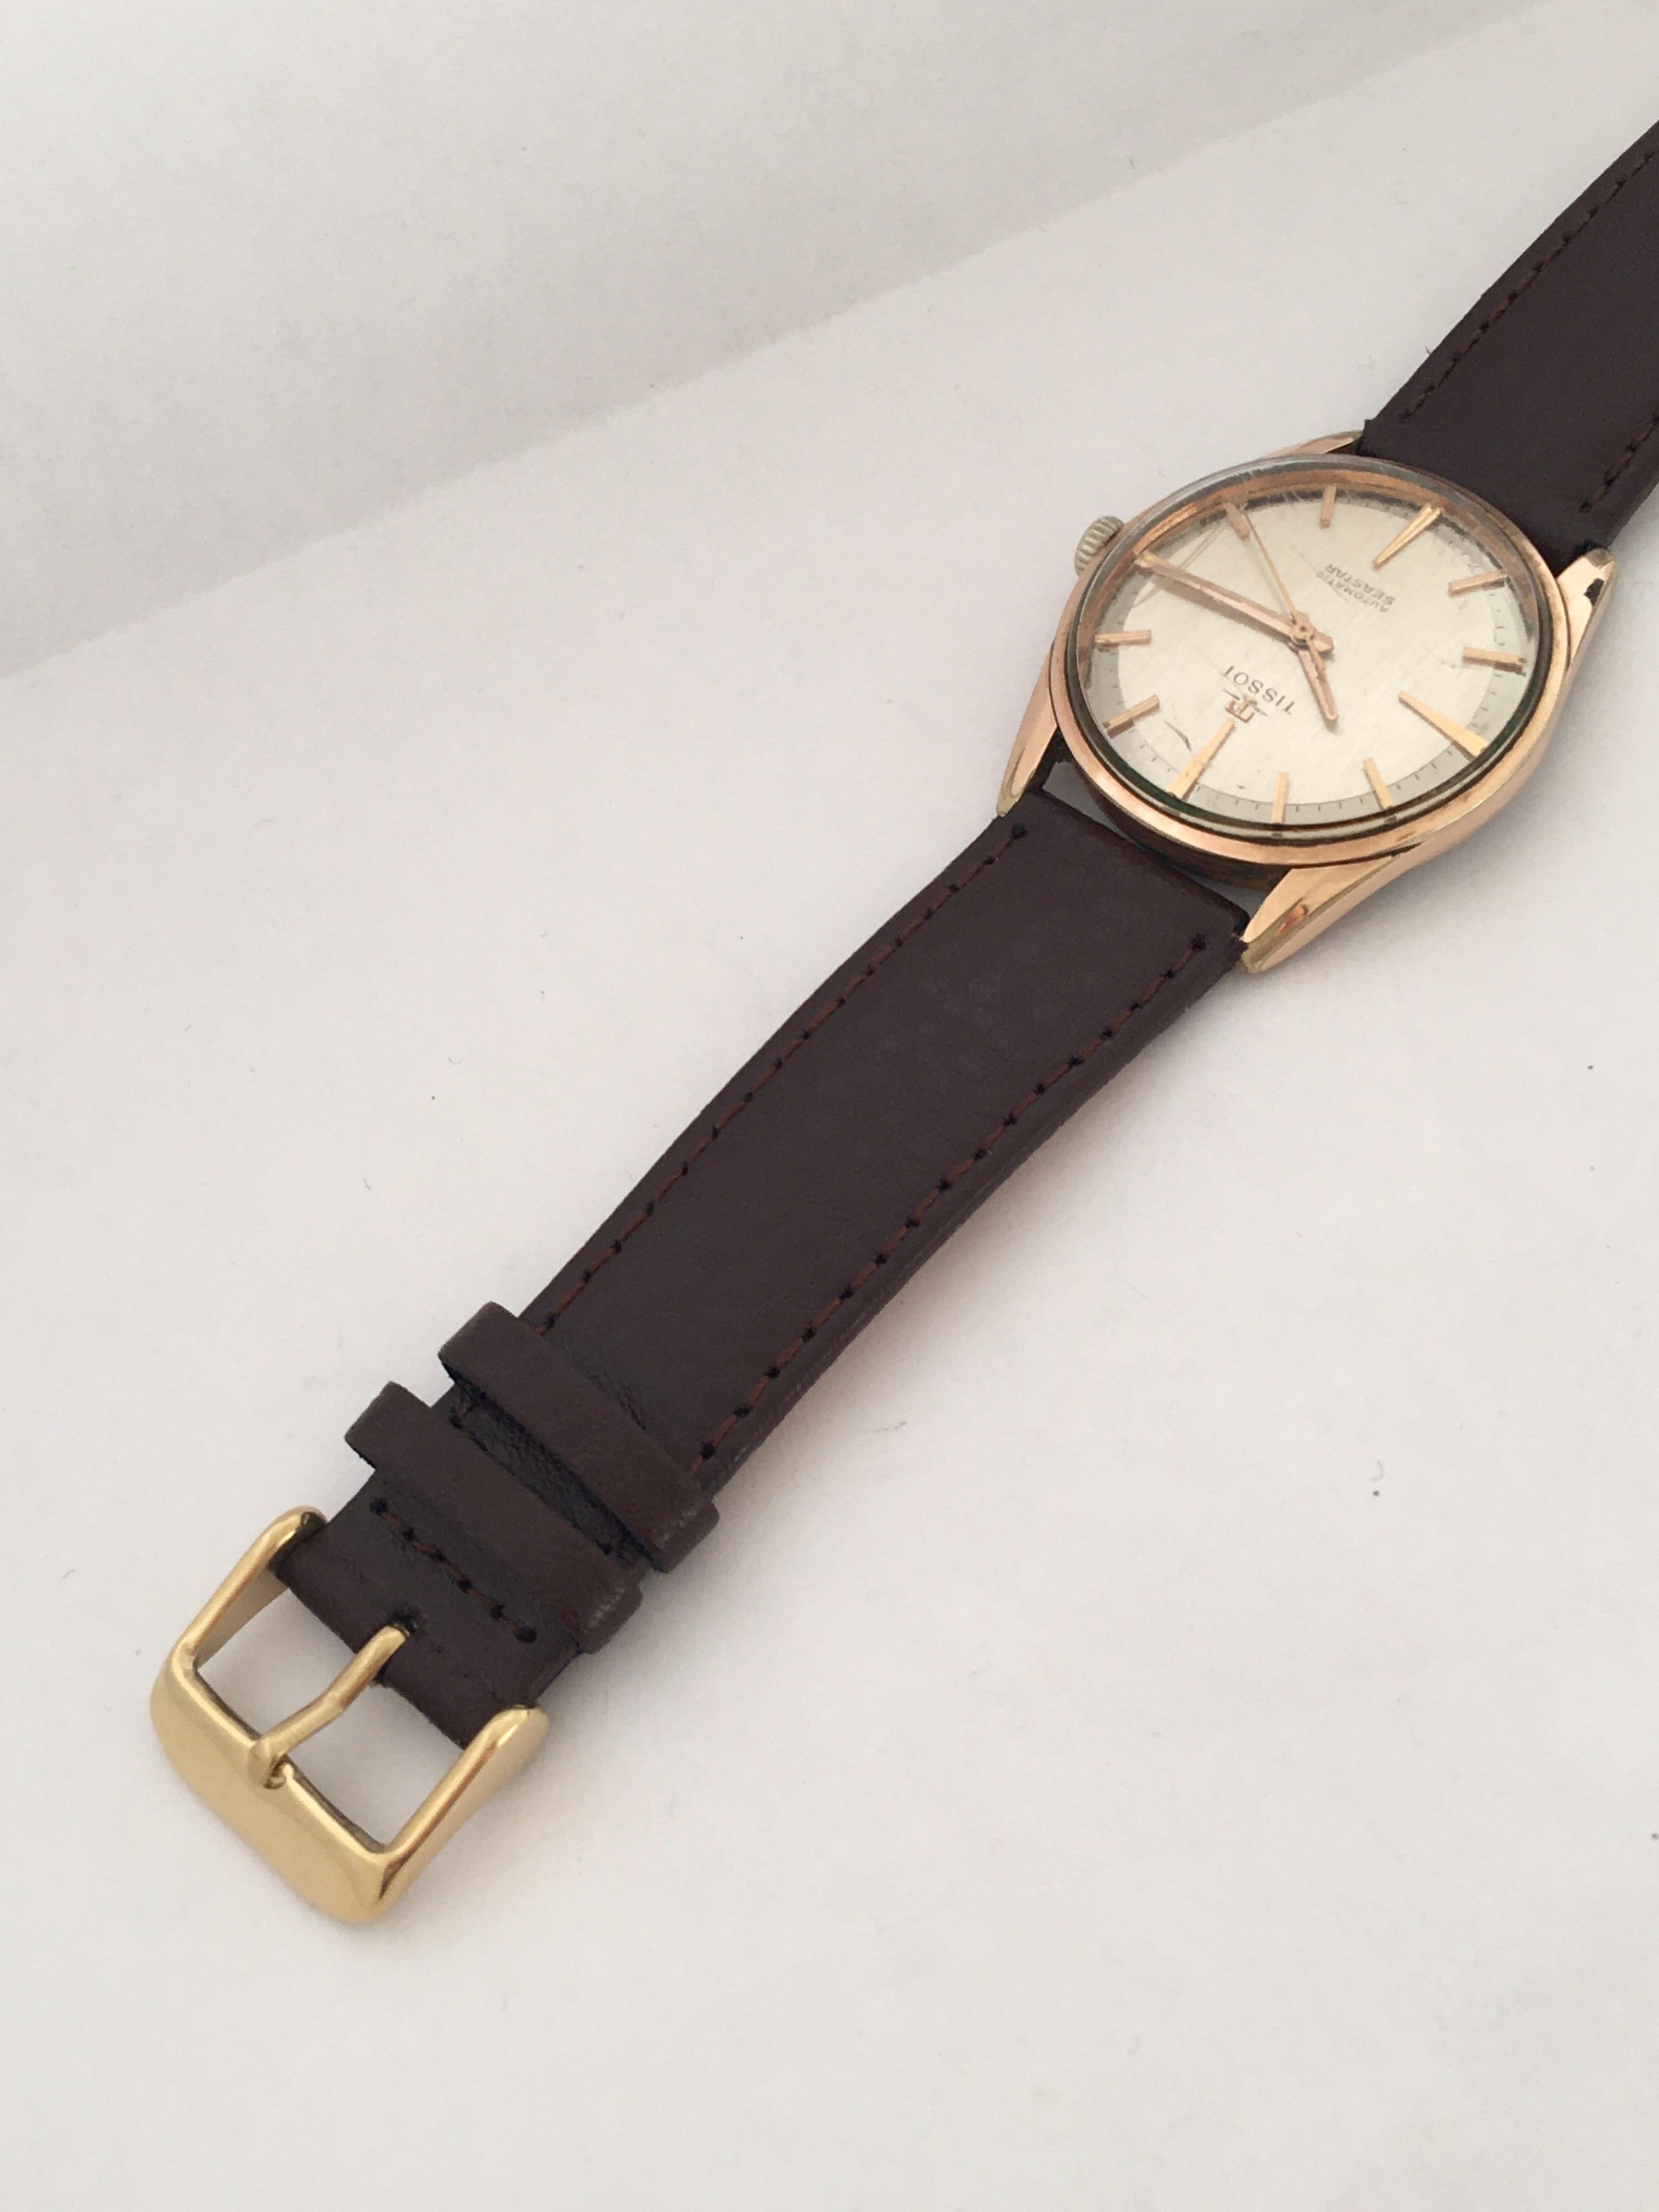 1960s TISSOT Automatic Seastar Gold-Plated Vintage Watch For Sale 2